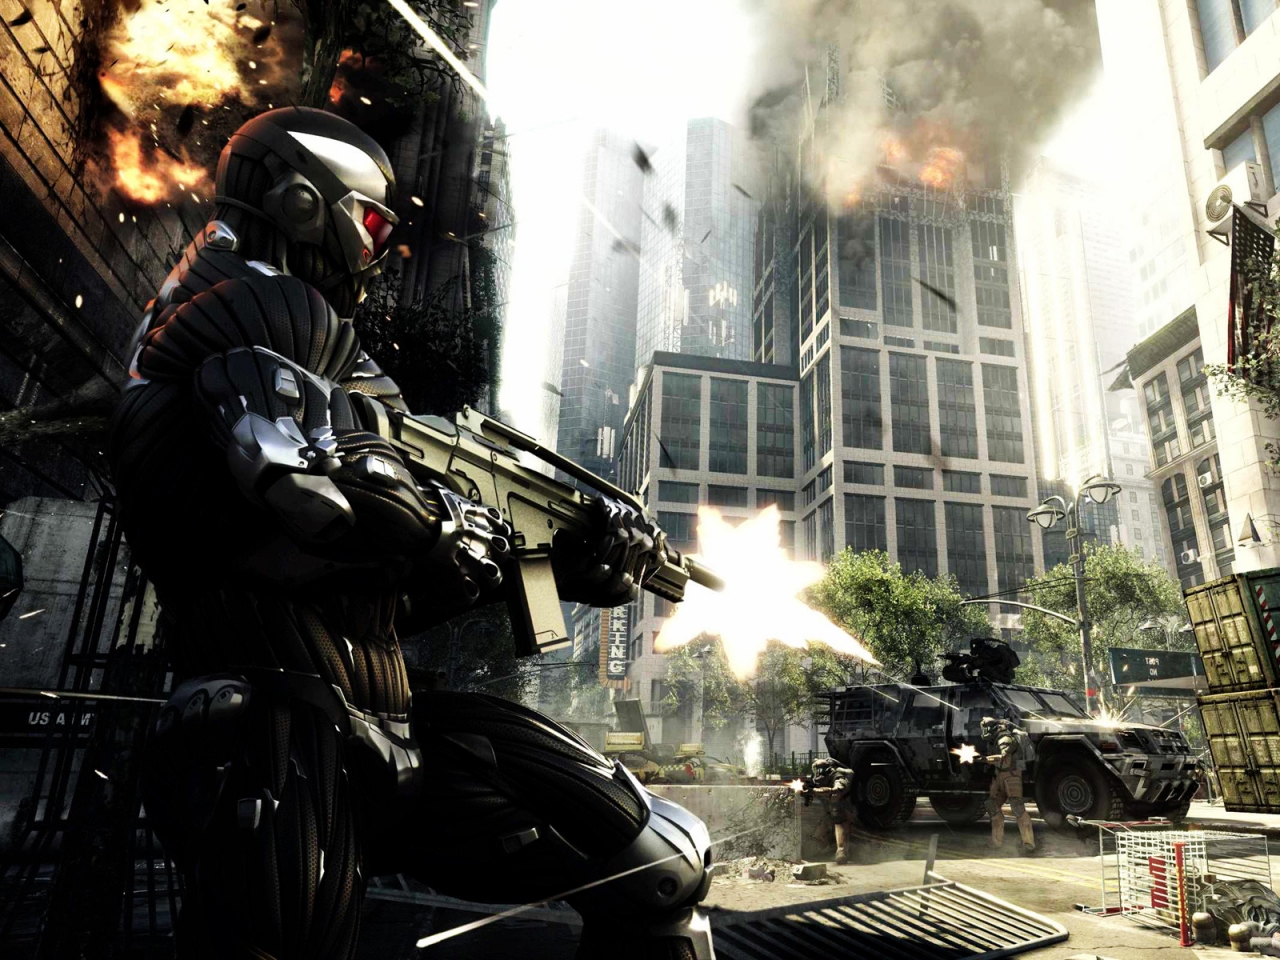 Crysis 2 Scene for 1280 x 960 resolution